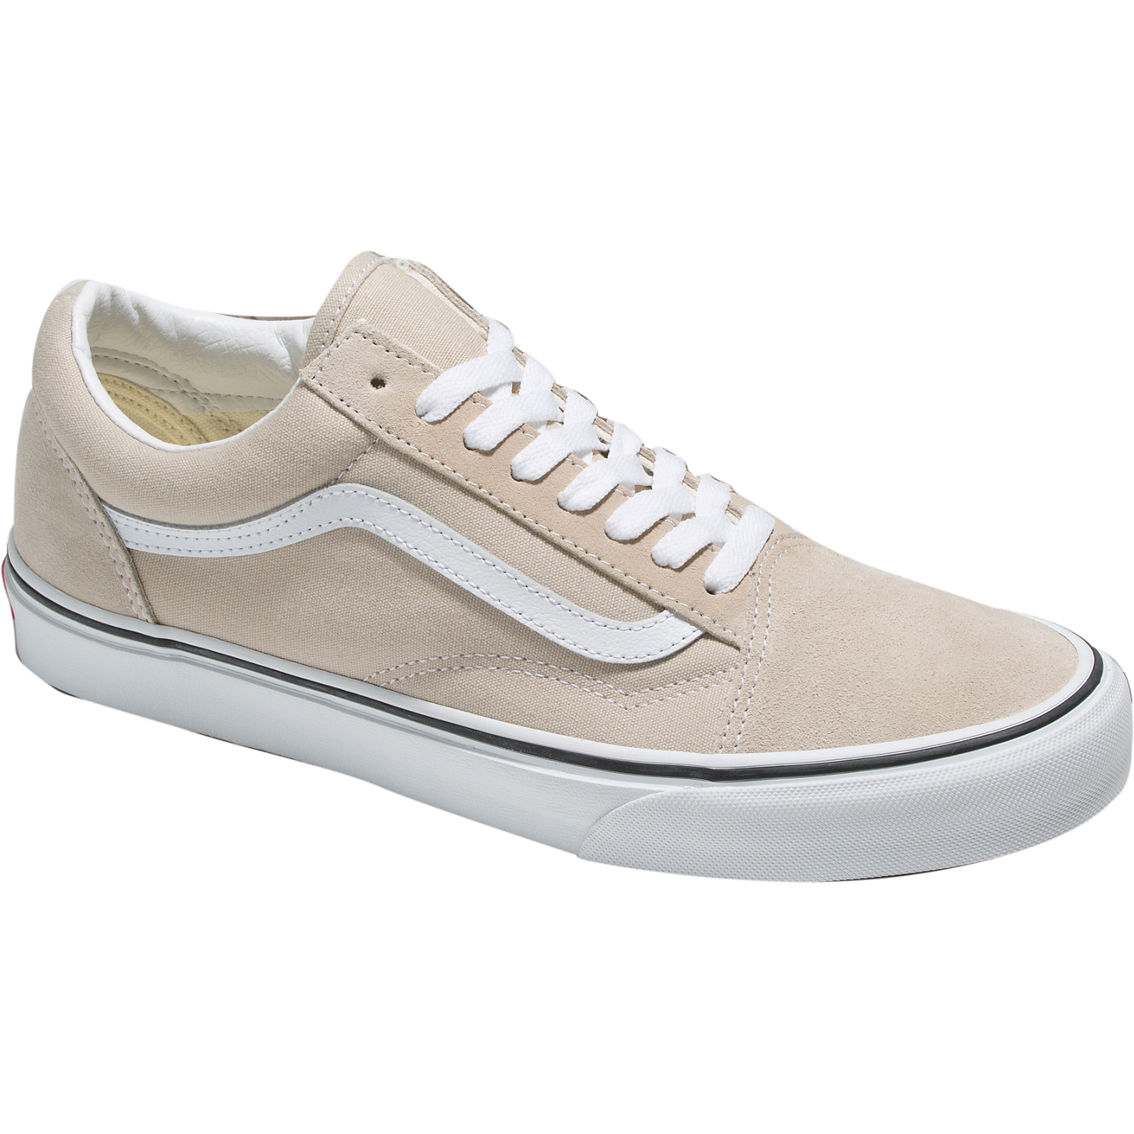 Vans Old Skool French Oak Shoes | Casuals | Shoes | Shop The Exchange